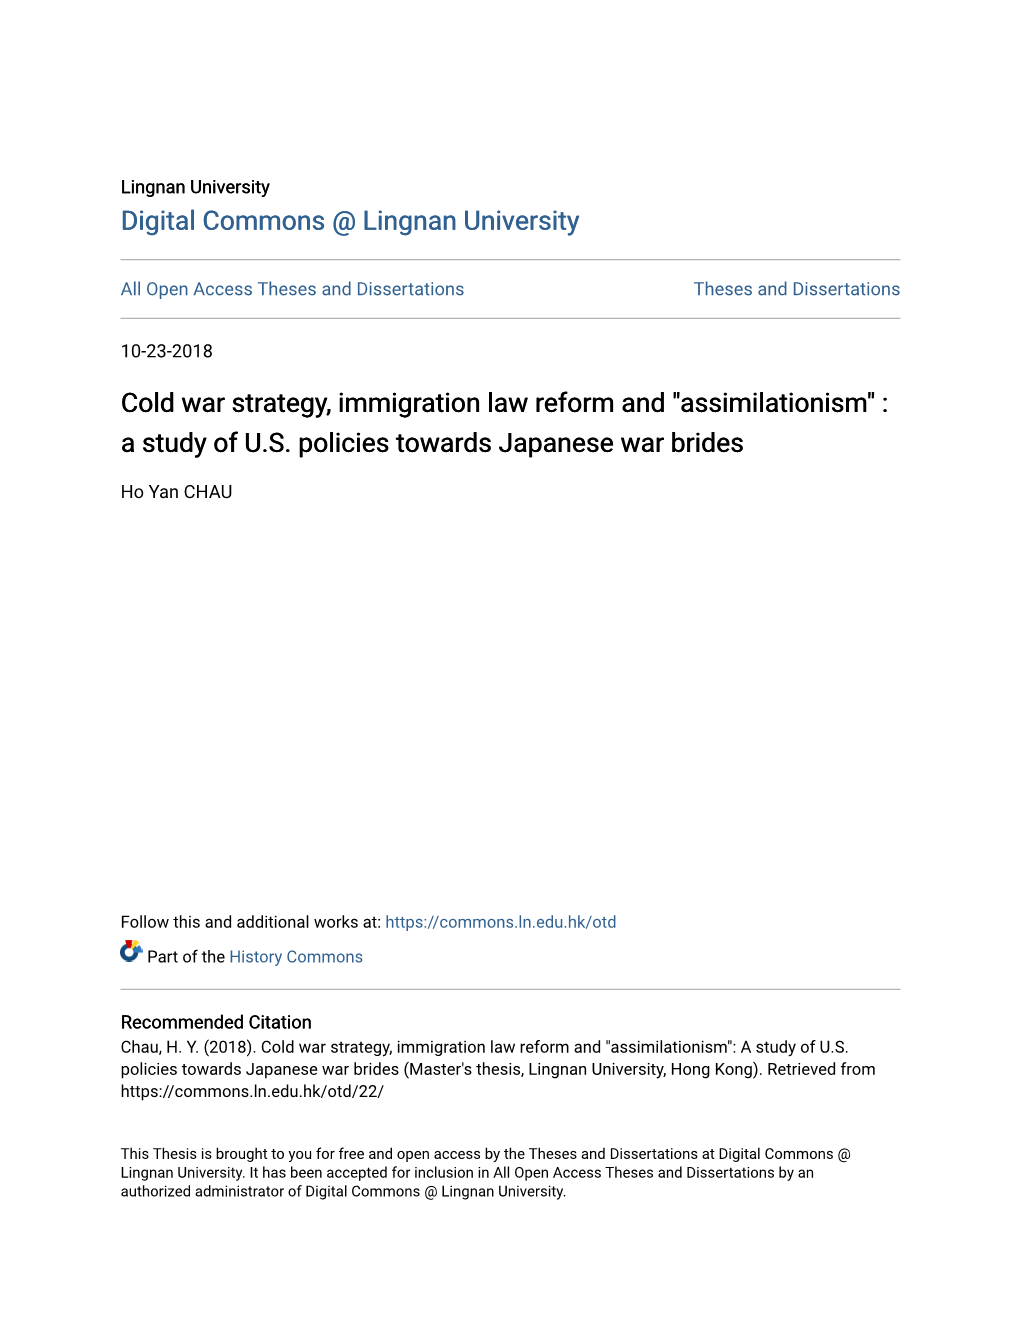 Cold War Strategy, Immigration Law Reform and "Assimilationism" : a Study of U.S. Policies Towards Japanese War Brides